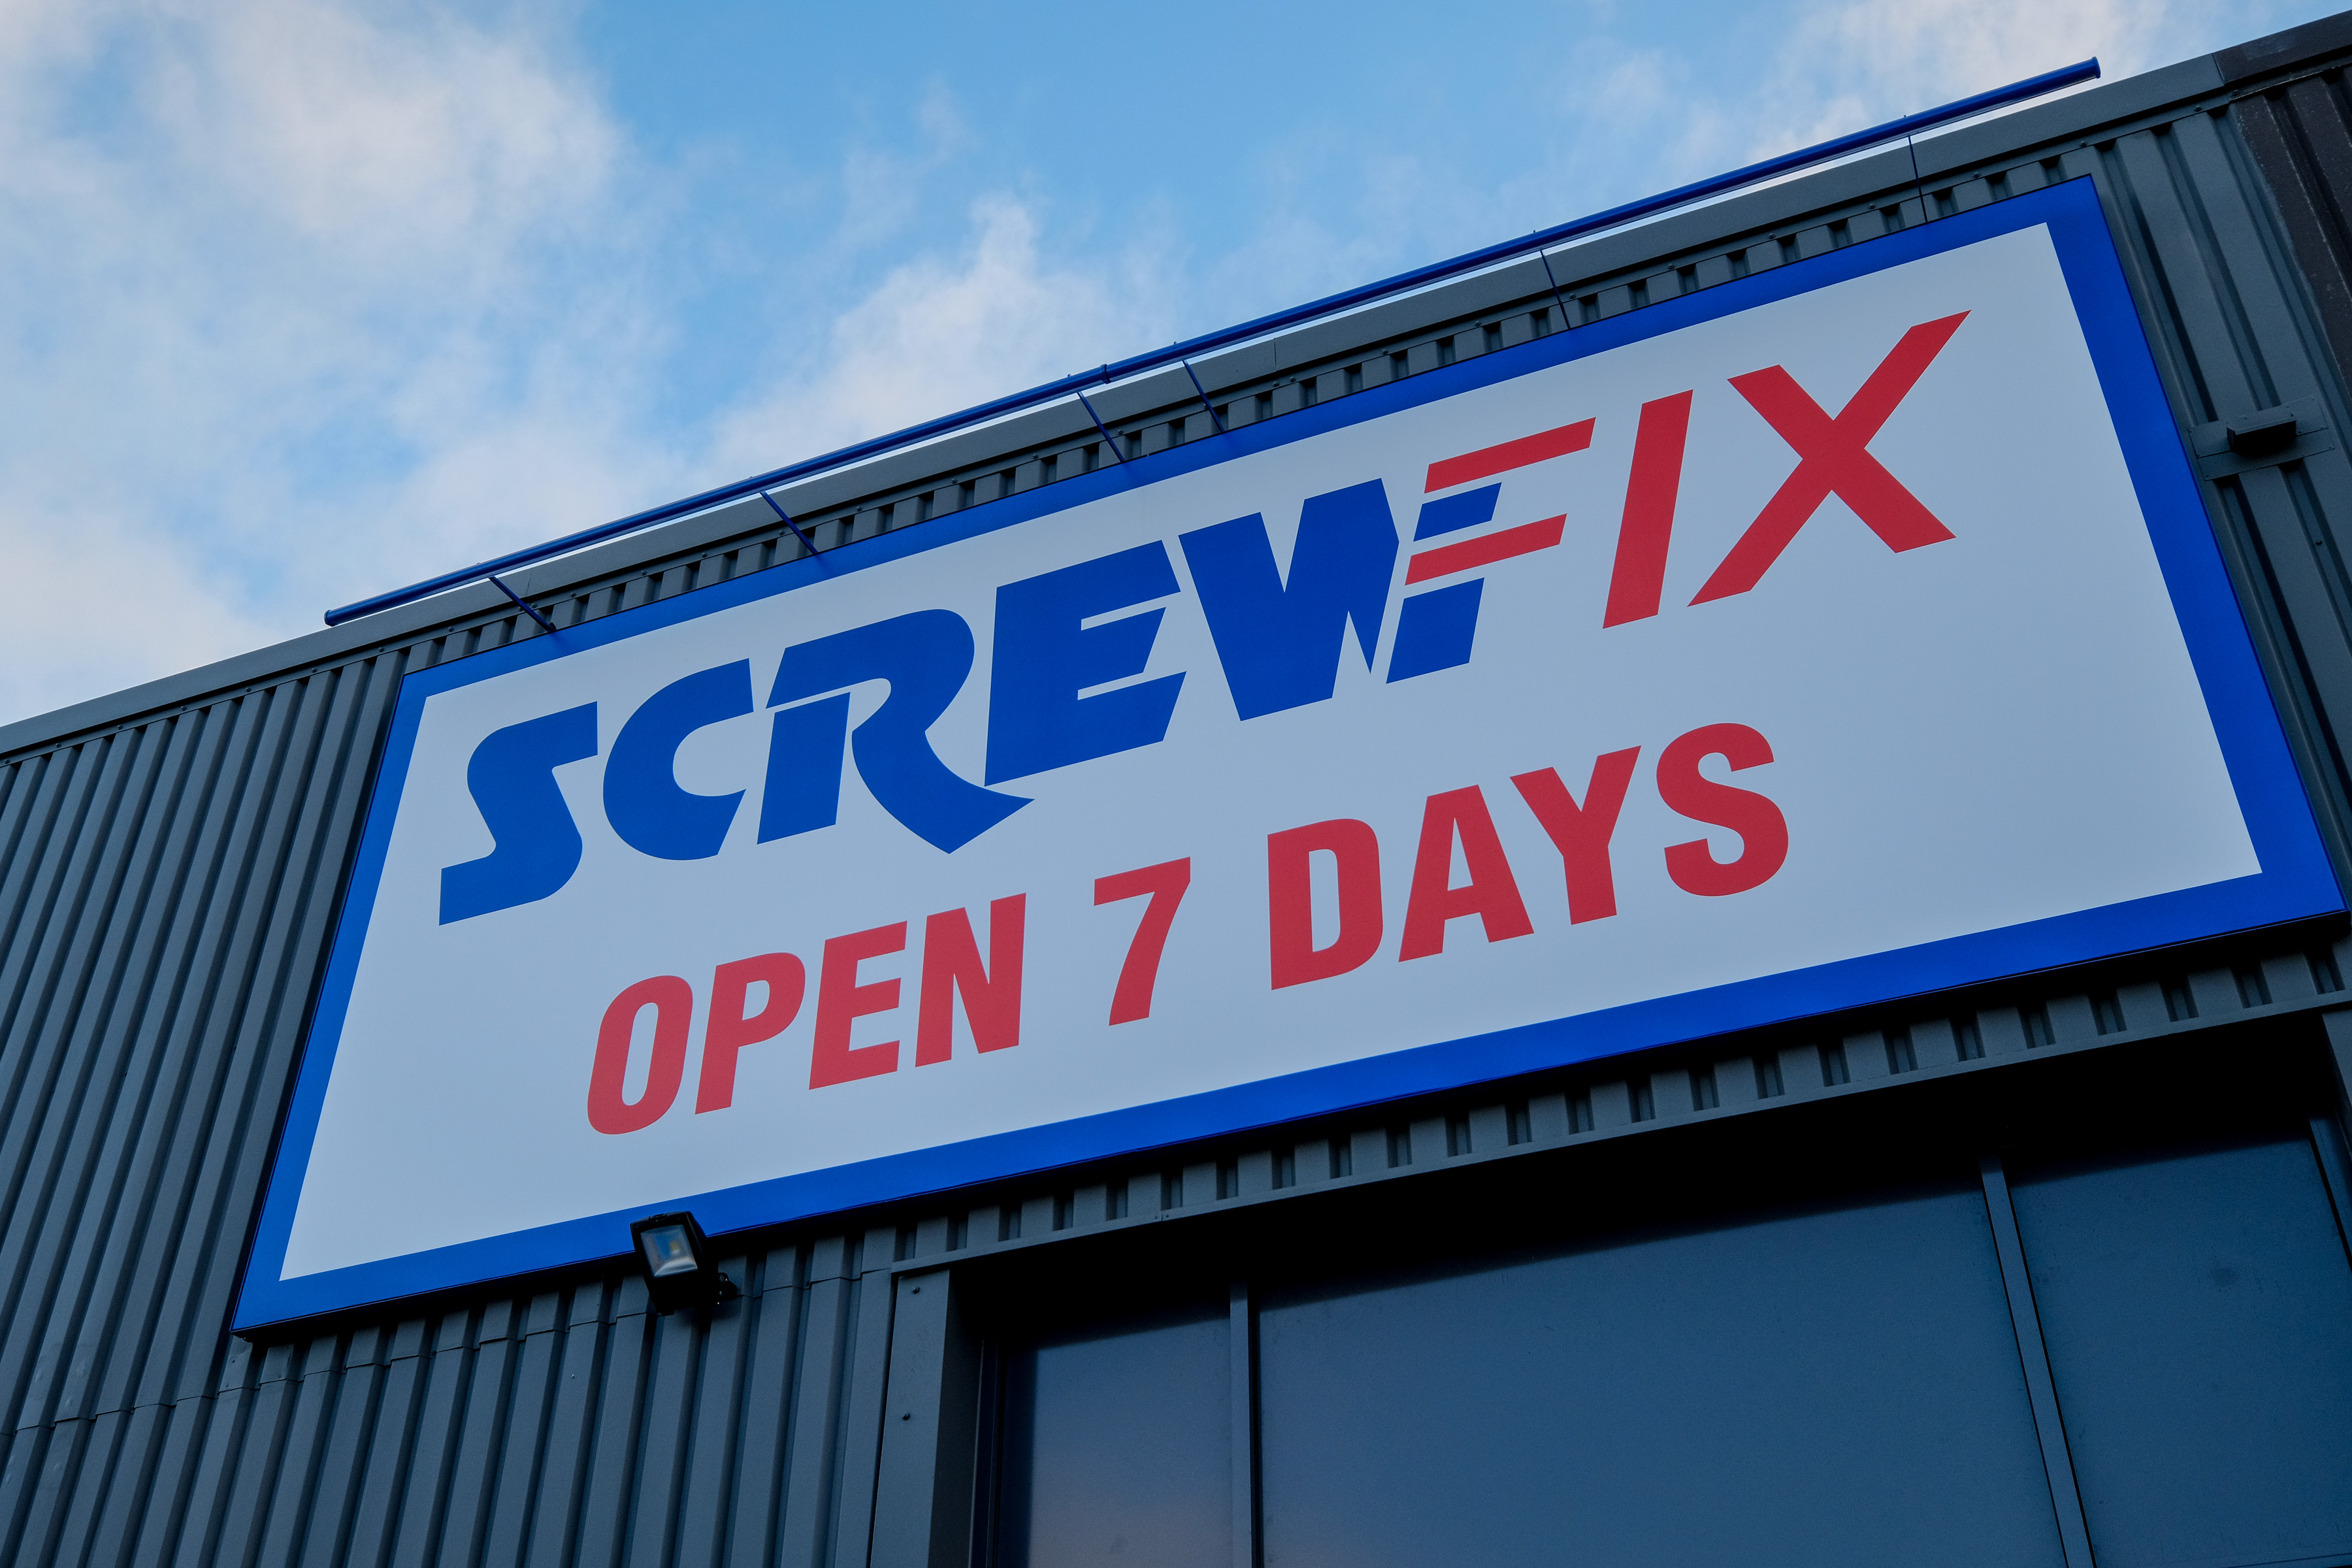 Jobs boost for Chorlton as new Screwfix store opens